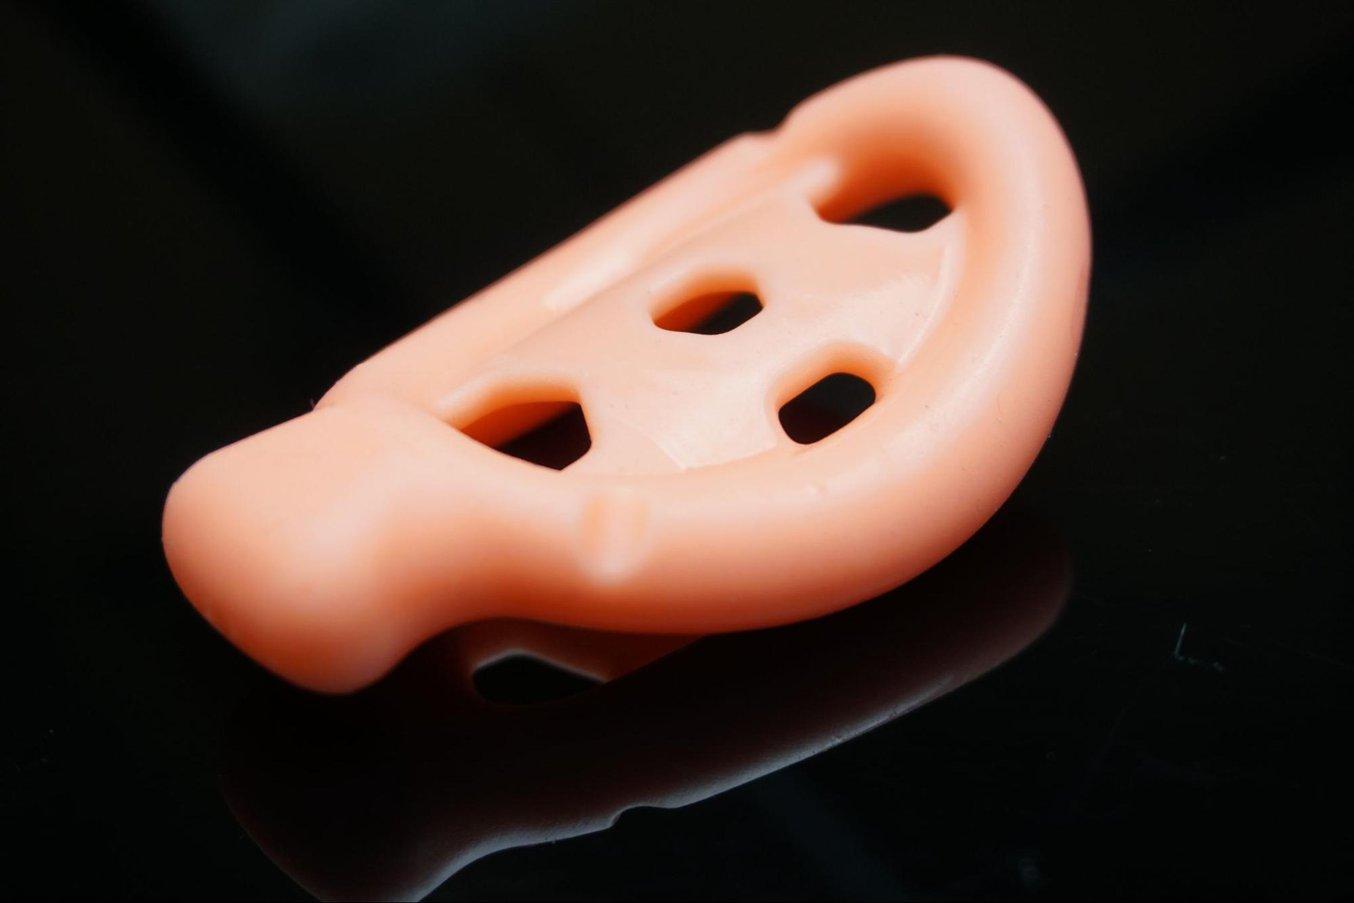 Patient-specific pessaries produced by silicone casting.